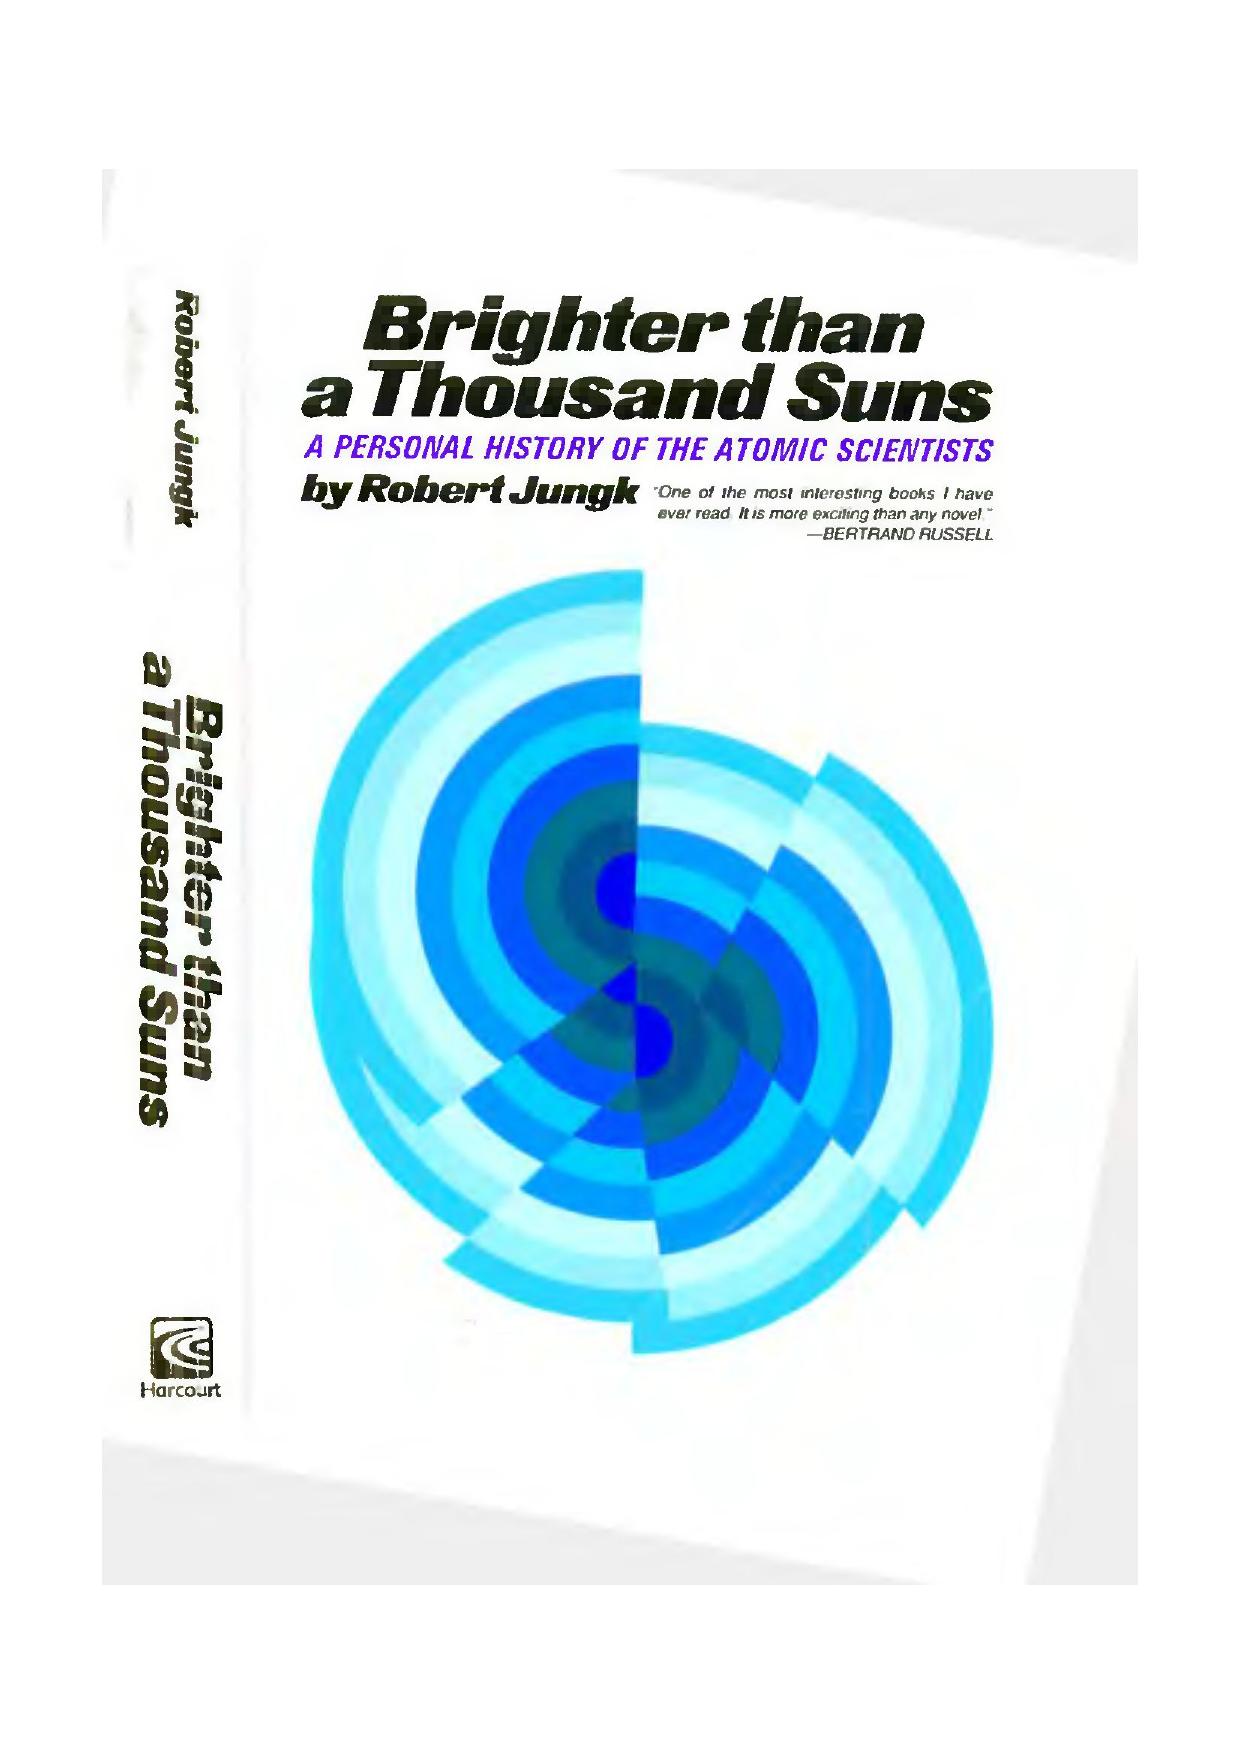 Brighter Than a Thousand Suns: A Personal History of the Atomic Scientists